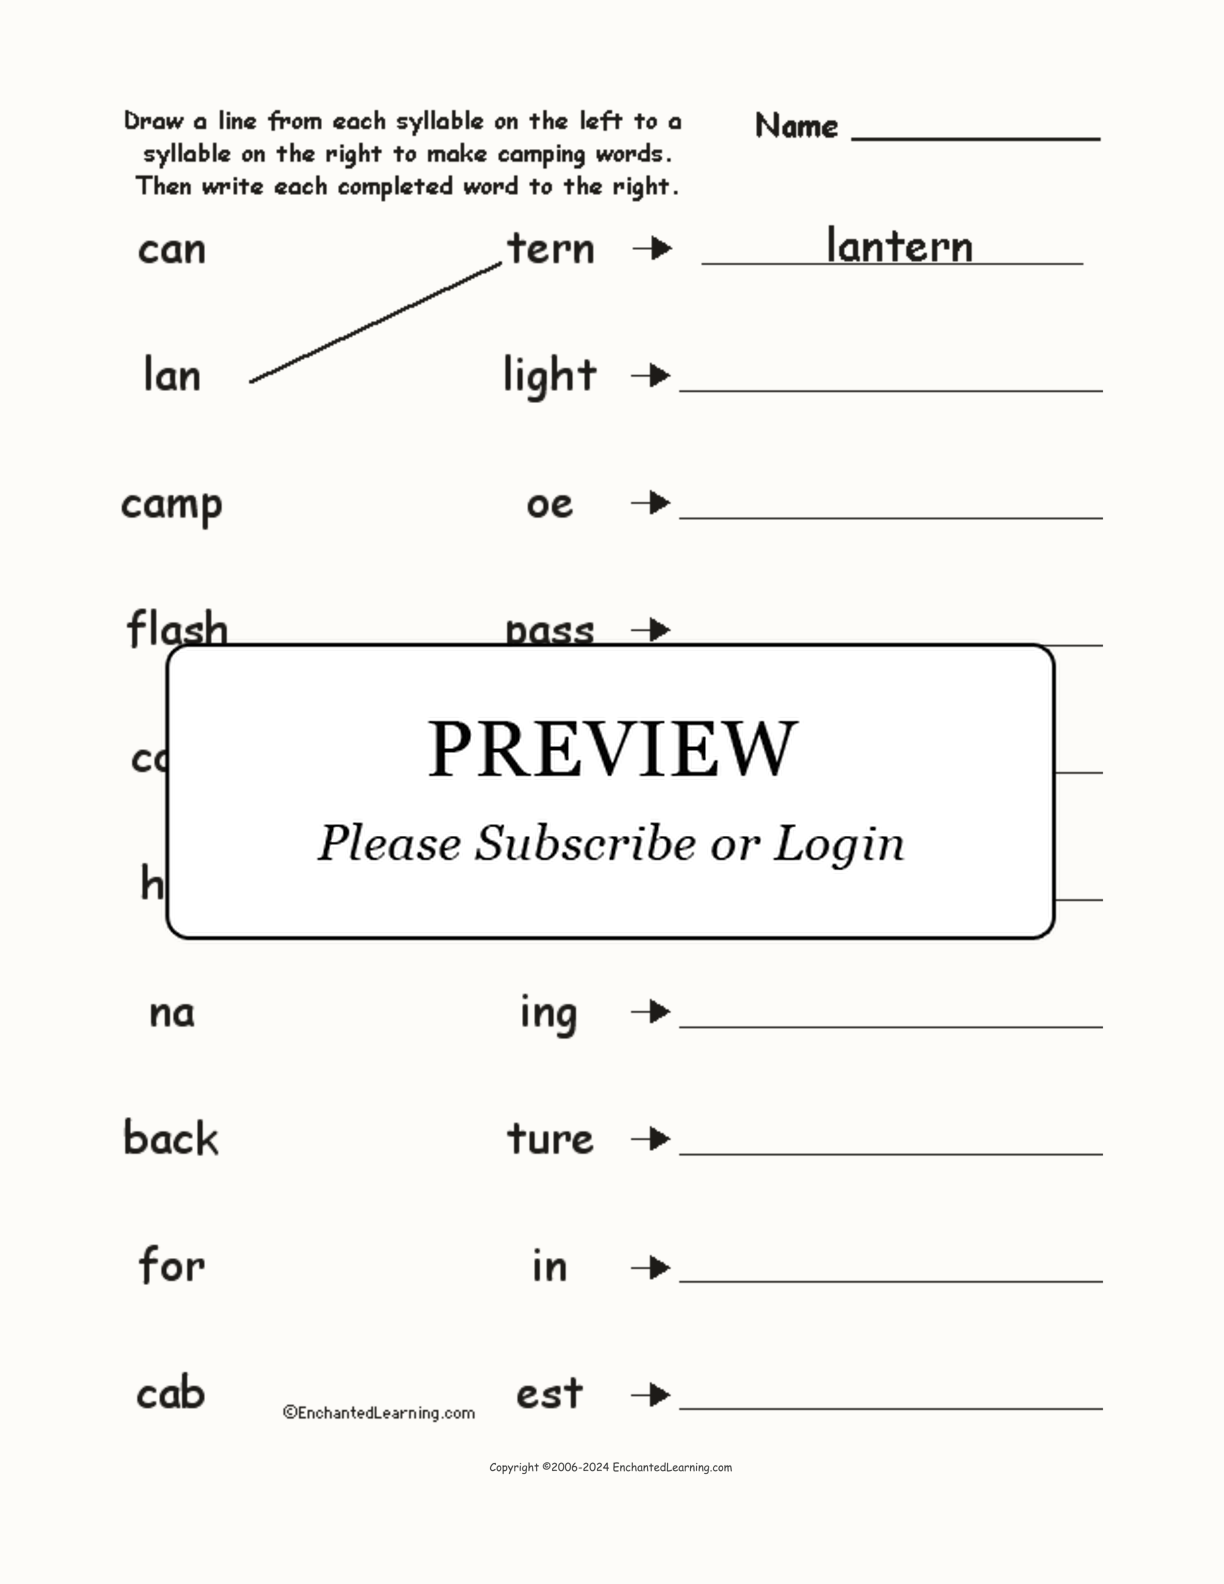 Match the Syllables: Camping Words interactive worksheet page 1